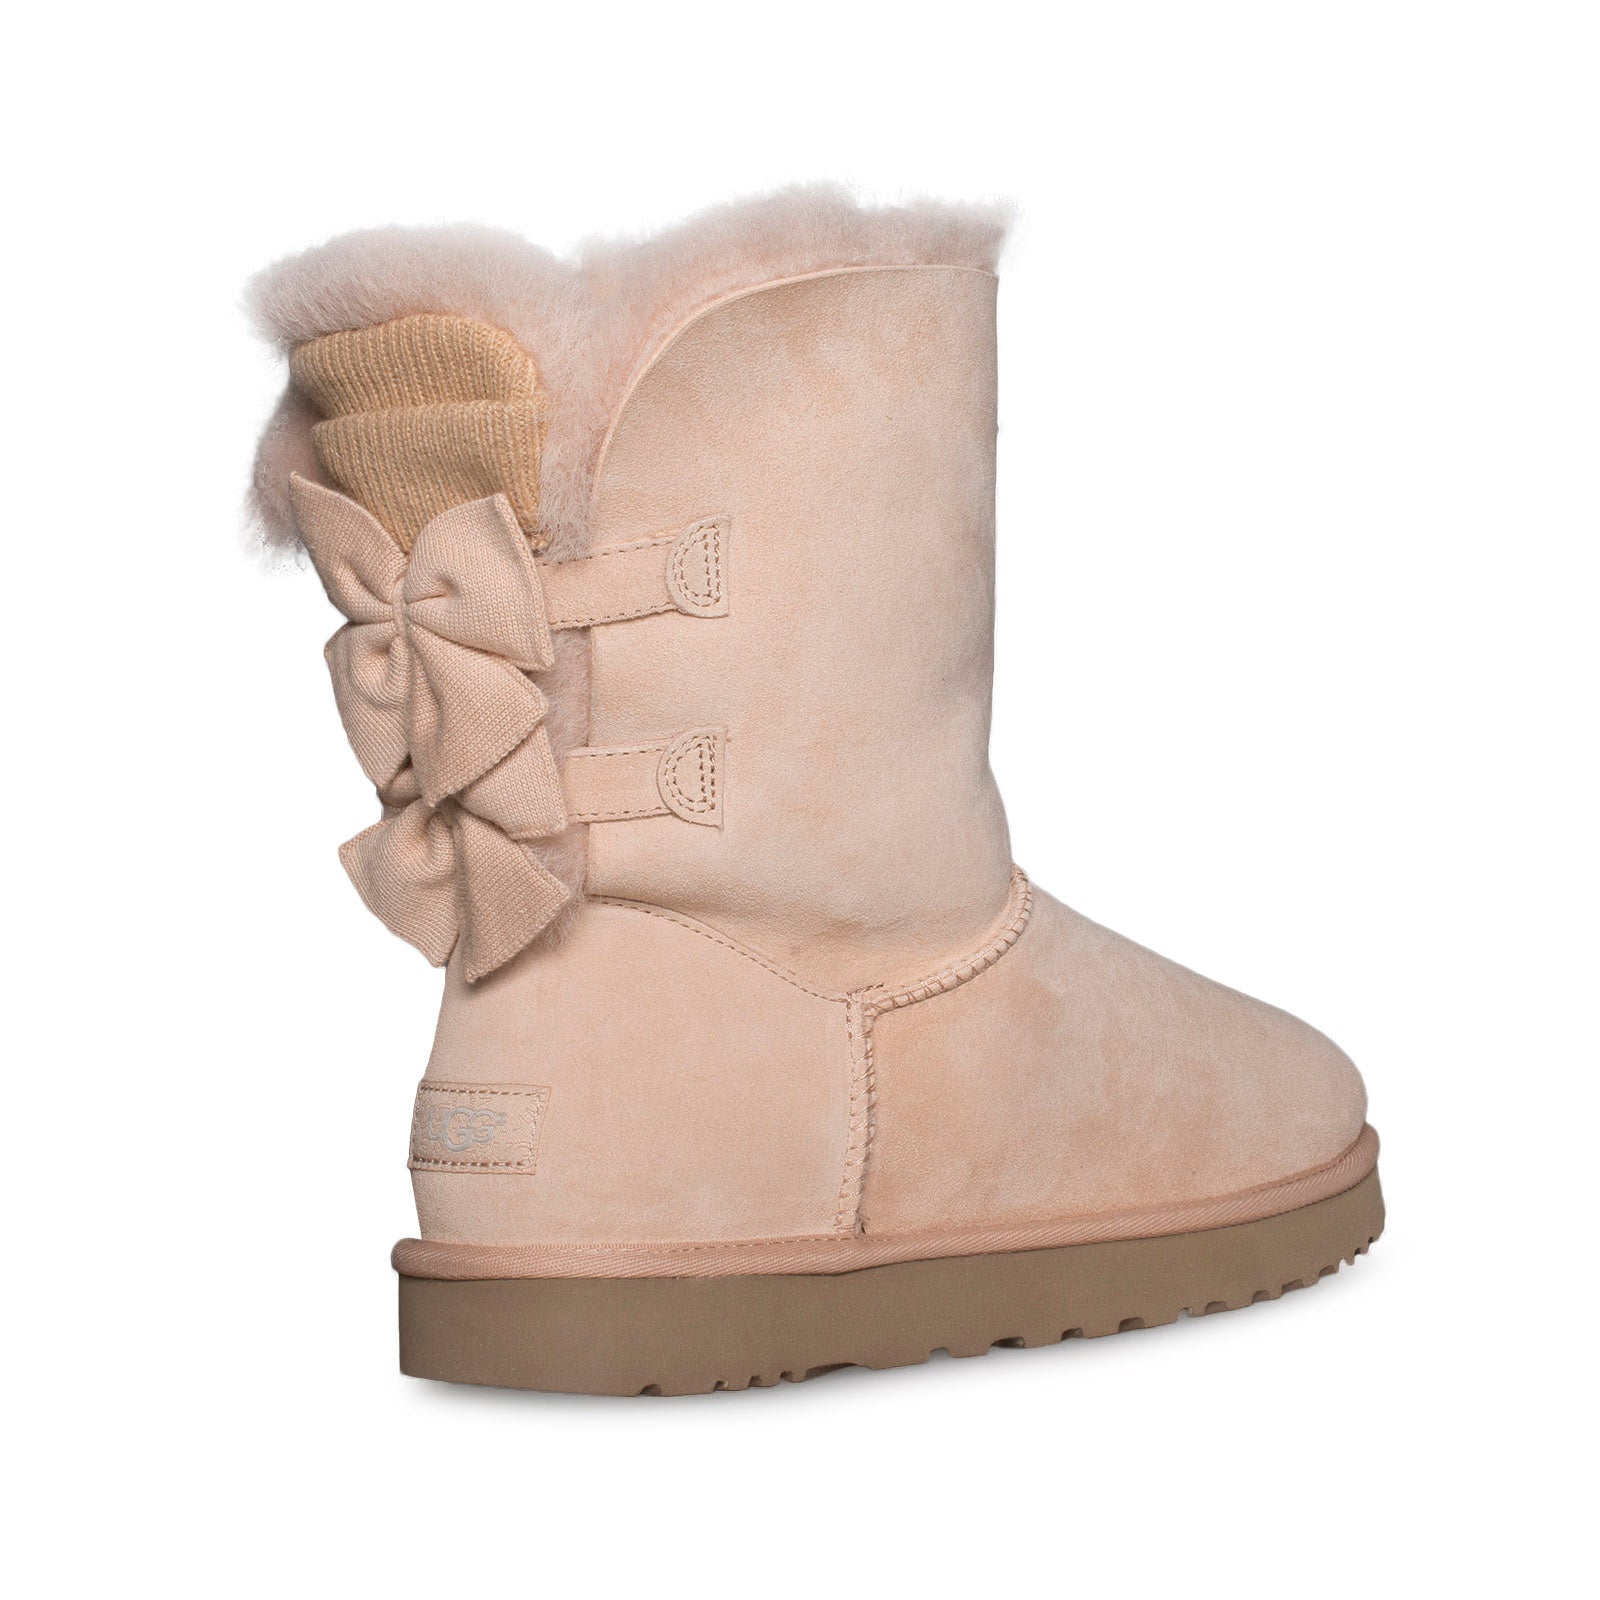 light brown ugg boots with bows